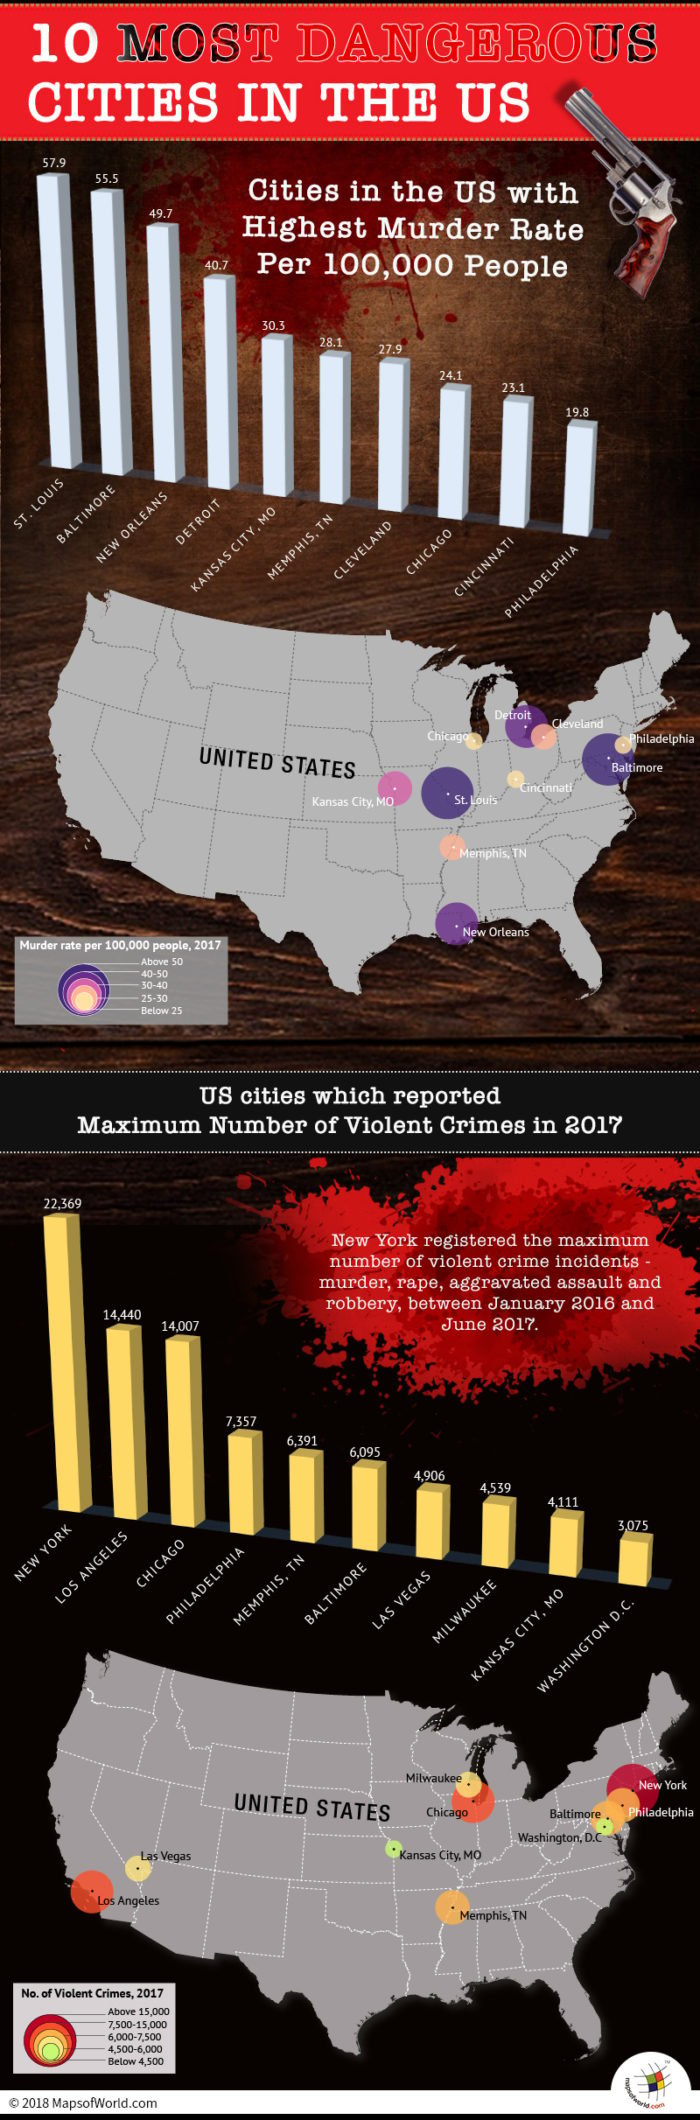 What are Ten Most Dangerous Cities in the US? - Answers